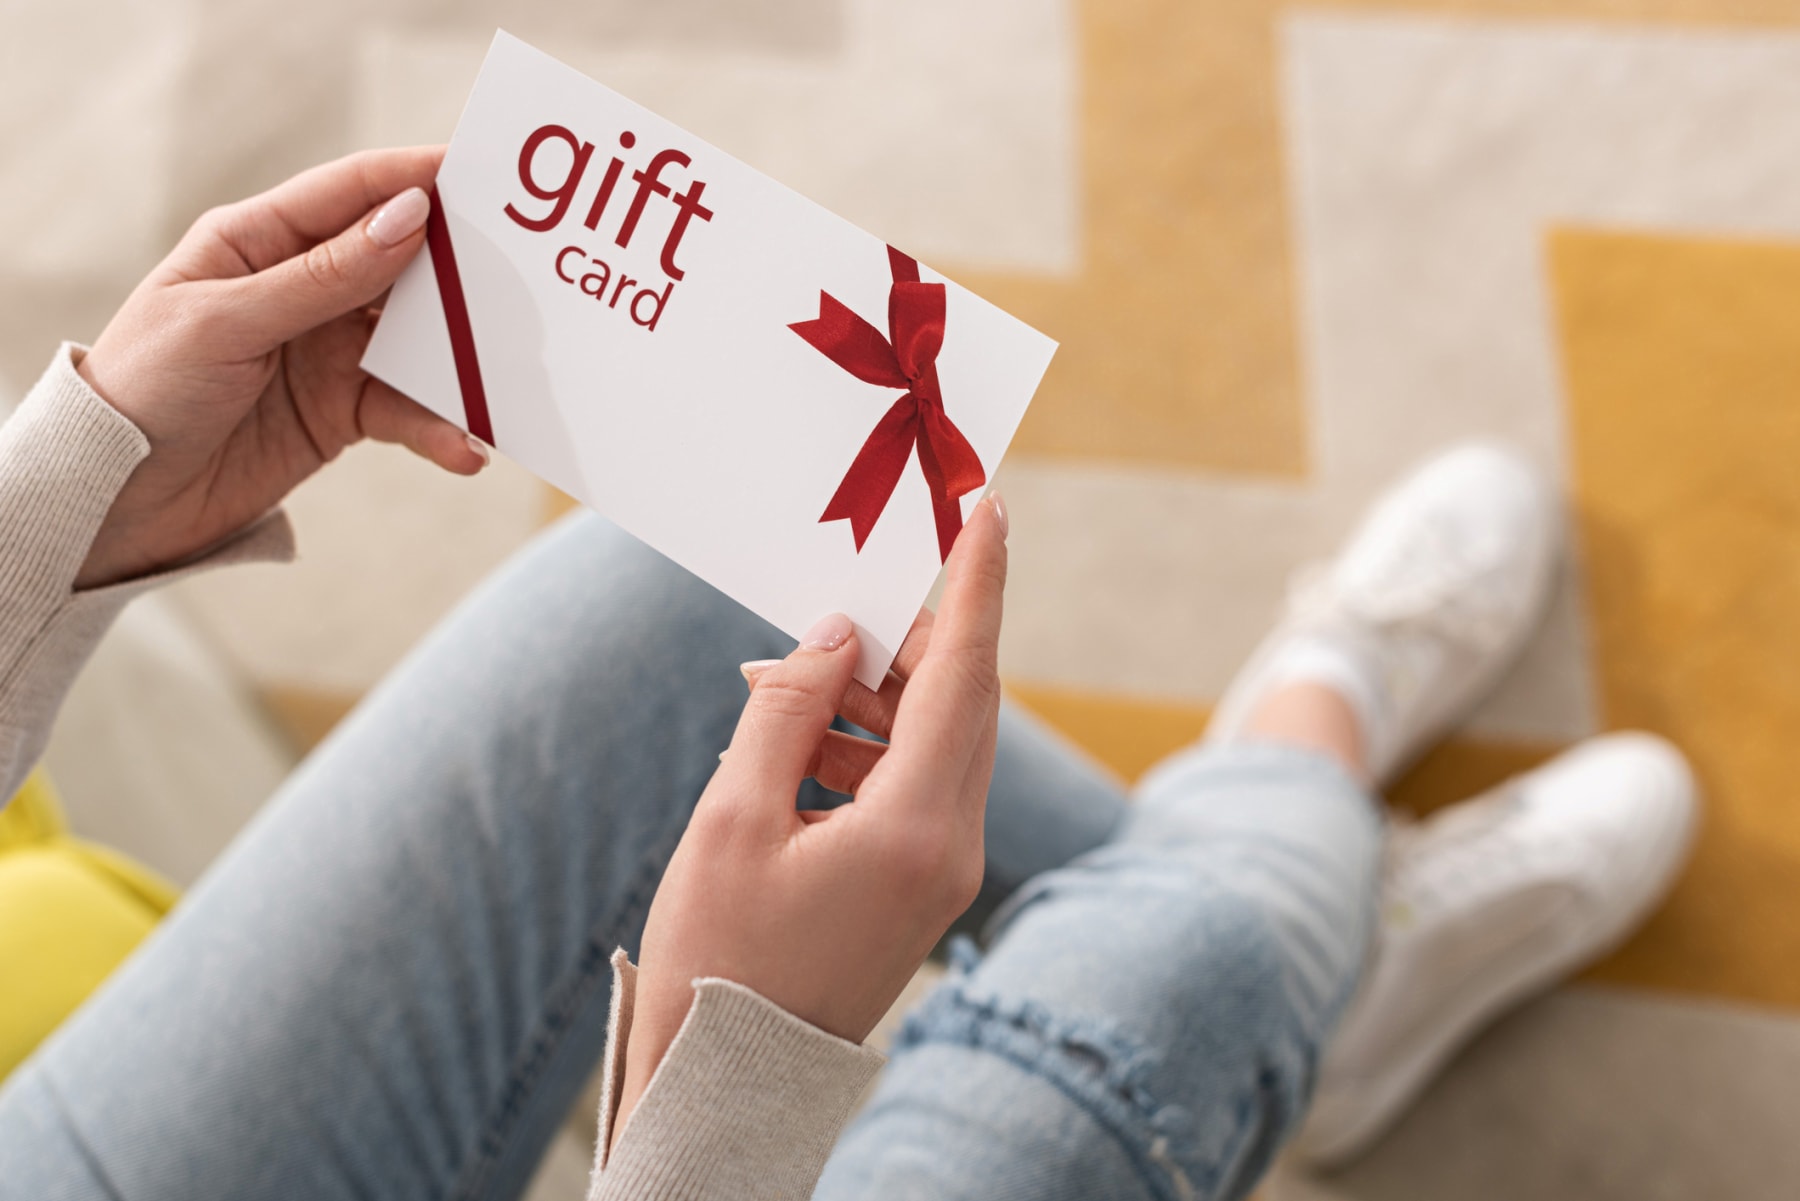 Person holds gift card with red bow on it.